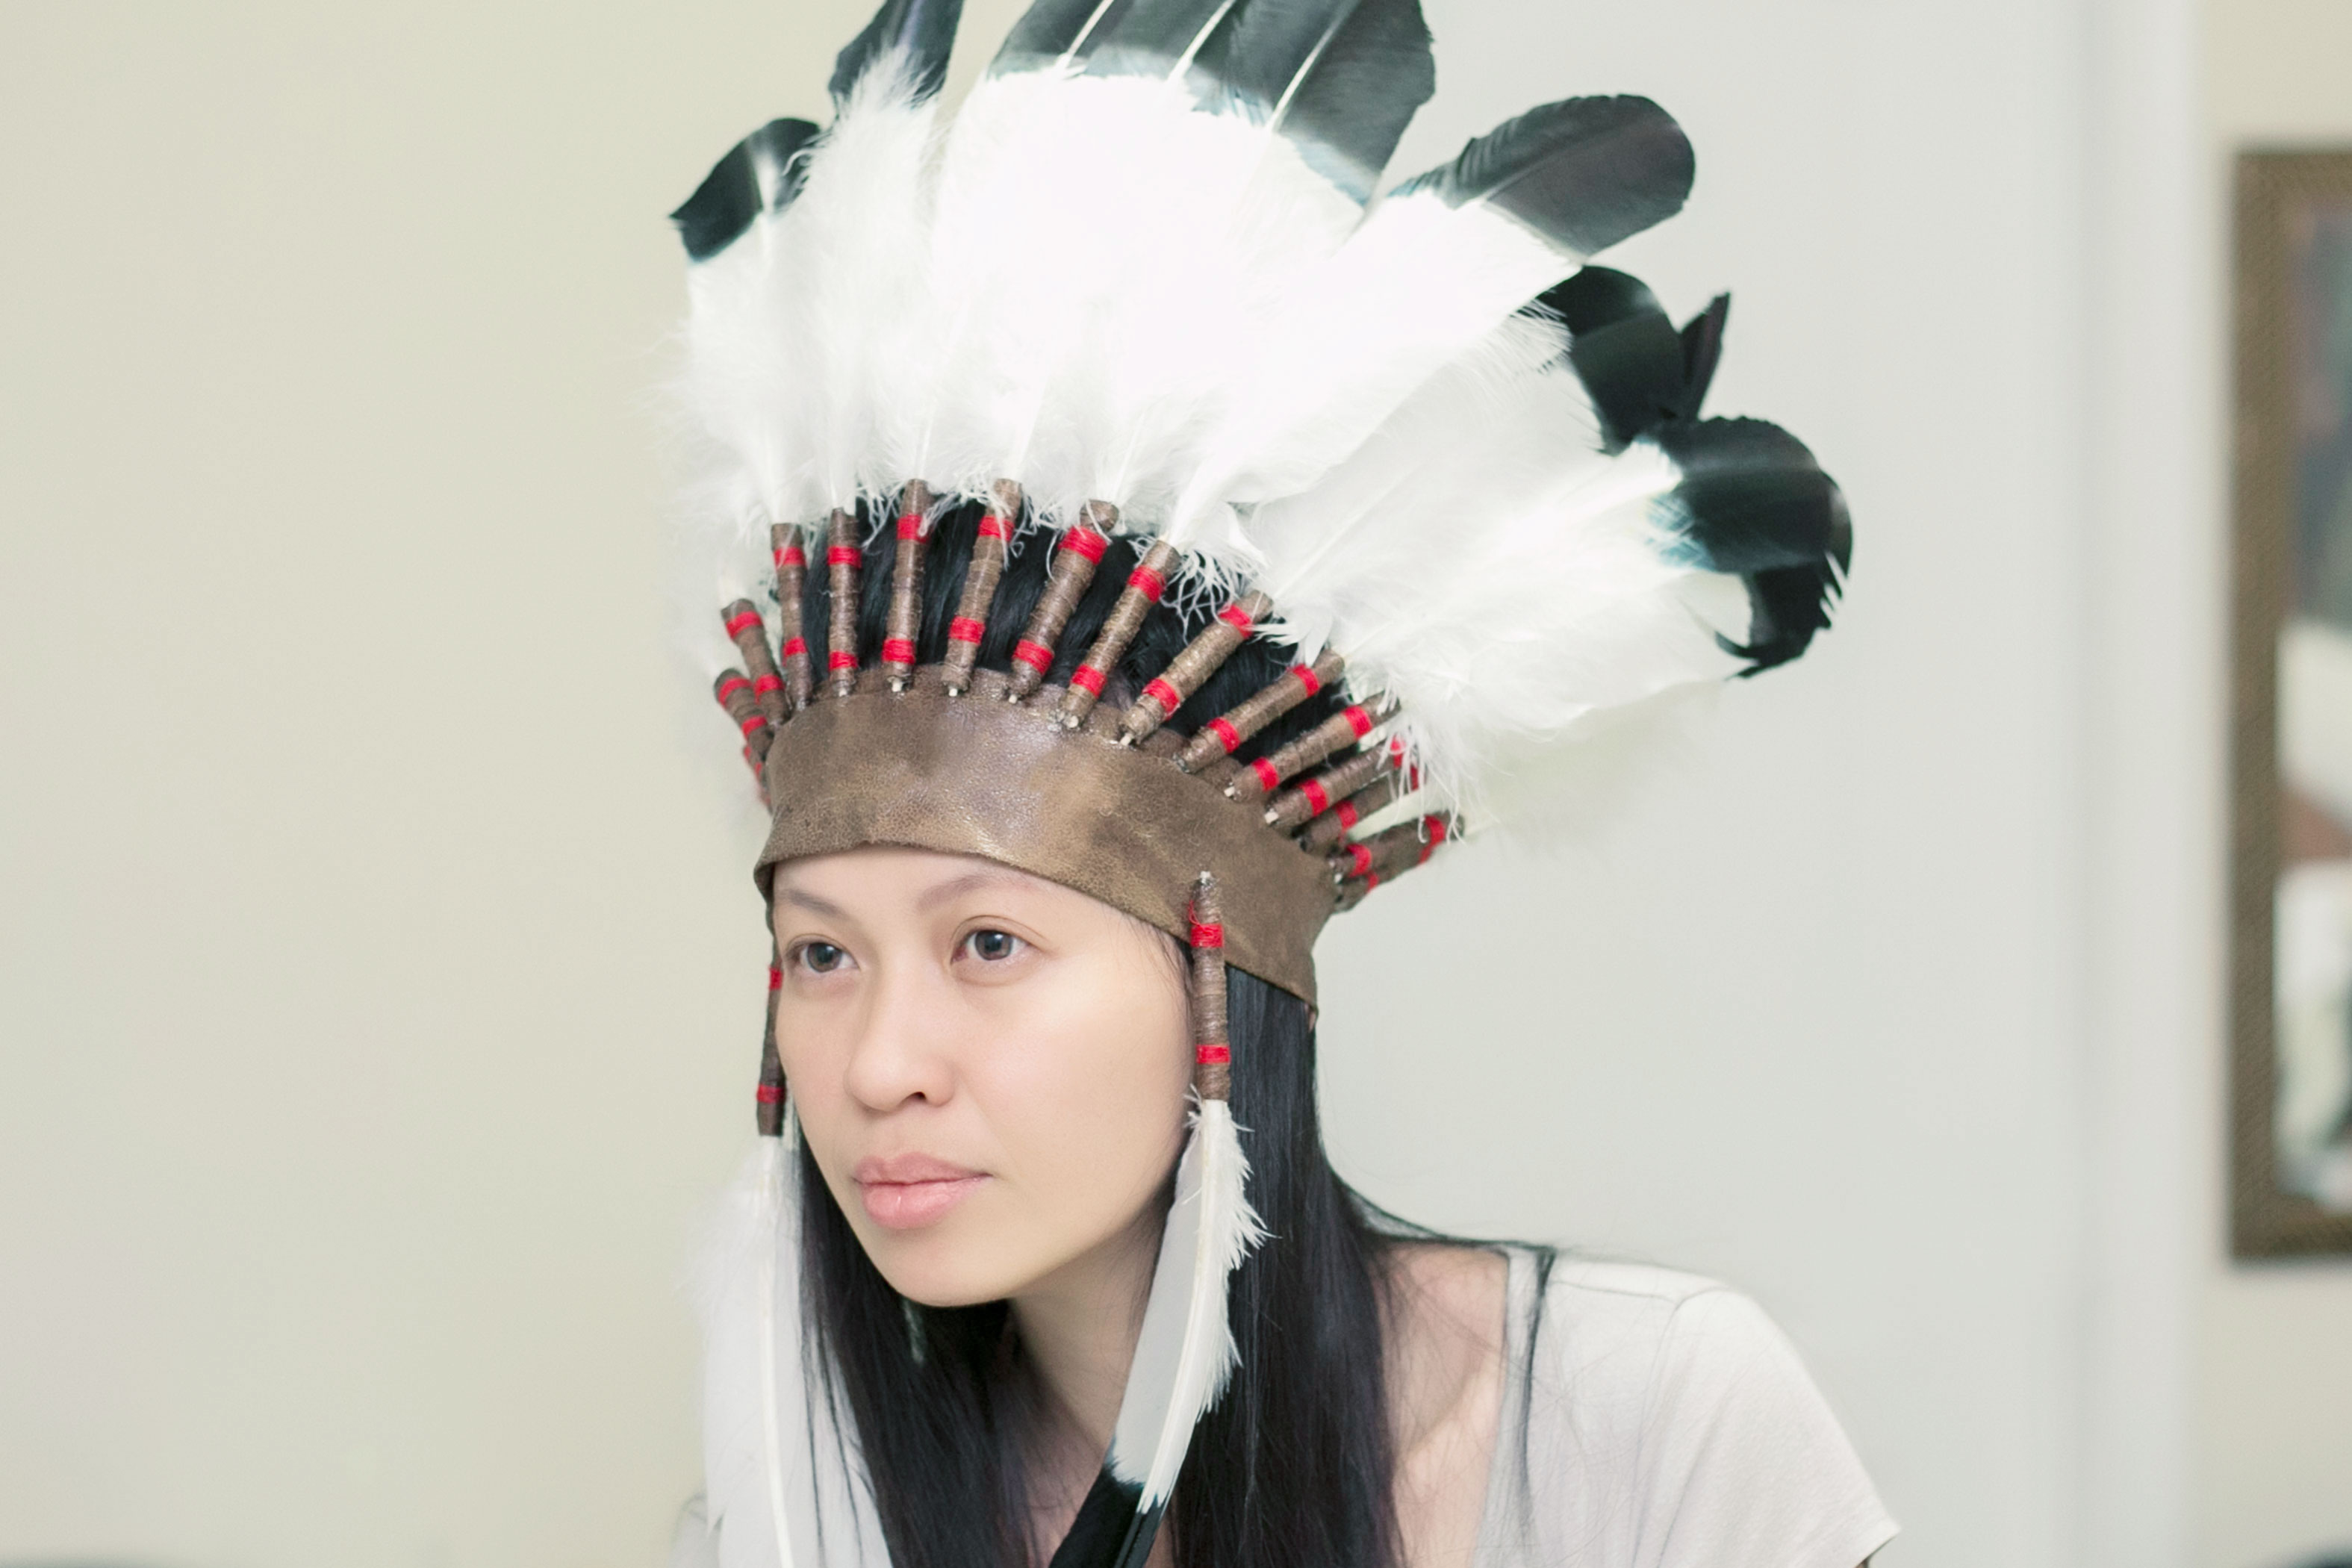 How to make indian headdress for adults